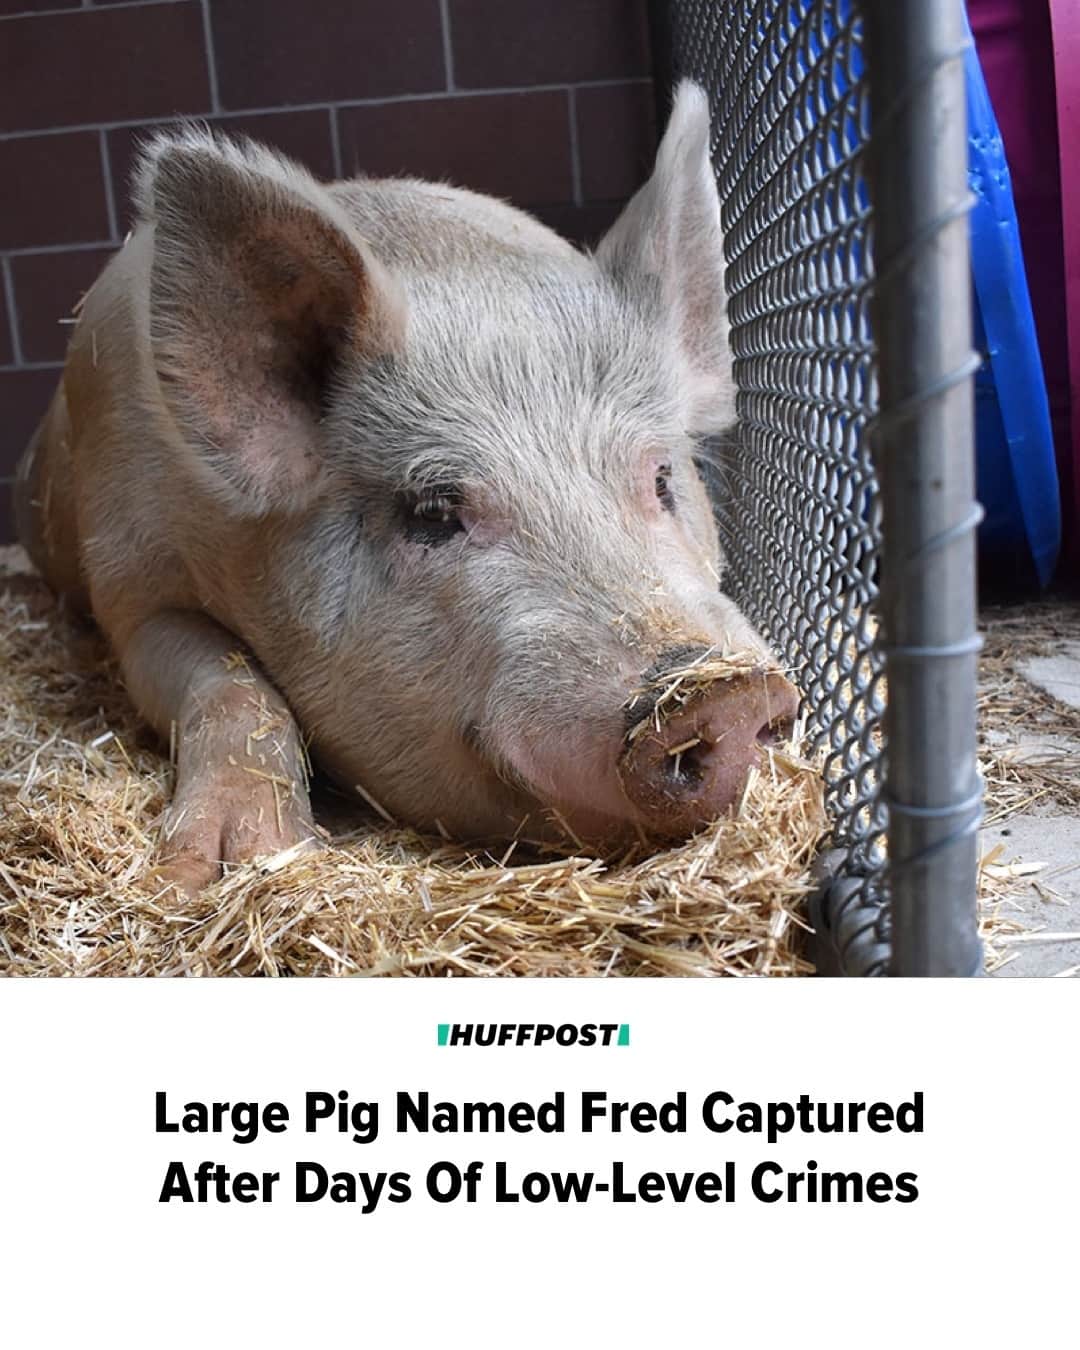 Huffington Postのインスタグラム：「A sizable and mischievous pig is on track for a new life after spending days disrupting traffic and damaging property in Aurora, Colorado.⁠ ⁠ Fred, as he’s now named, was first spotted on the streets on Sept. 24, when the city received “its first call about a pig in traffic,” city spokesperson Michael Brannen told HuffPost in an email.⁠ ⁠ But Fred evaded animal control officers that afternoon, and over the next few days the city received multiple sightings of the pig, mostly “trotting near traffic and digging up landscaping.”⁠ ⁠ At some point, Fred gained a rope lasso seen trailing around his neck, indicating that someone had tried and failed to catch him. It’s unclear who the attempted captor was, since Brannen clarified the lasso was not the doing of animal services.⁠ ⁠ On Sept. 27, Fred’s troublemaking ― dubbed a “multi-day crime spree” by local news outlet Denver7 ― came to a close. But the pig didn’t give himself up easily. ⁠ ⁠ Read more at our link in bio. // 📷 City of Aurora // 🖊️ Hilary Hanson」